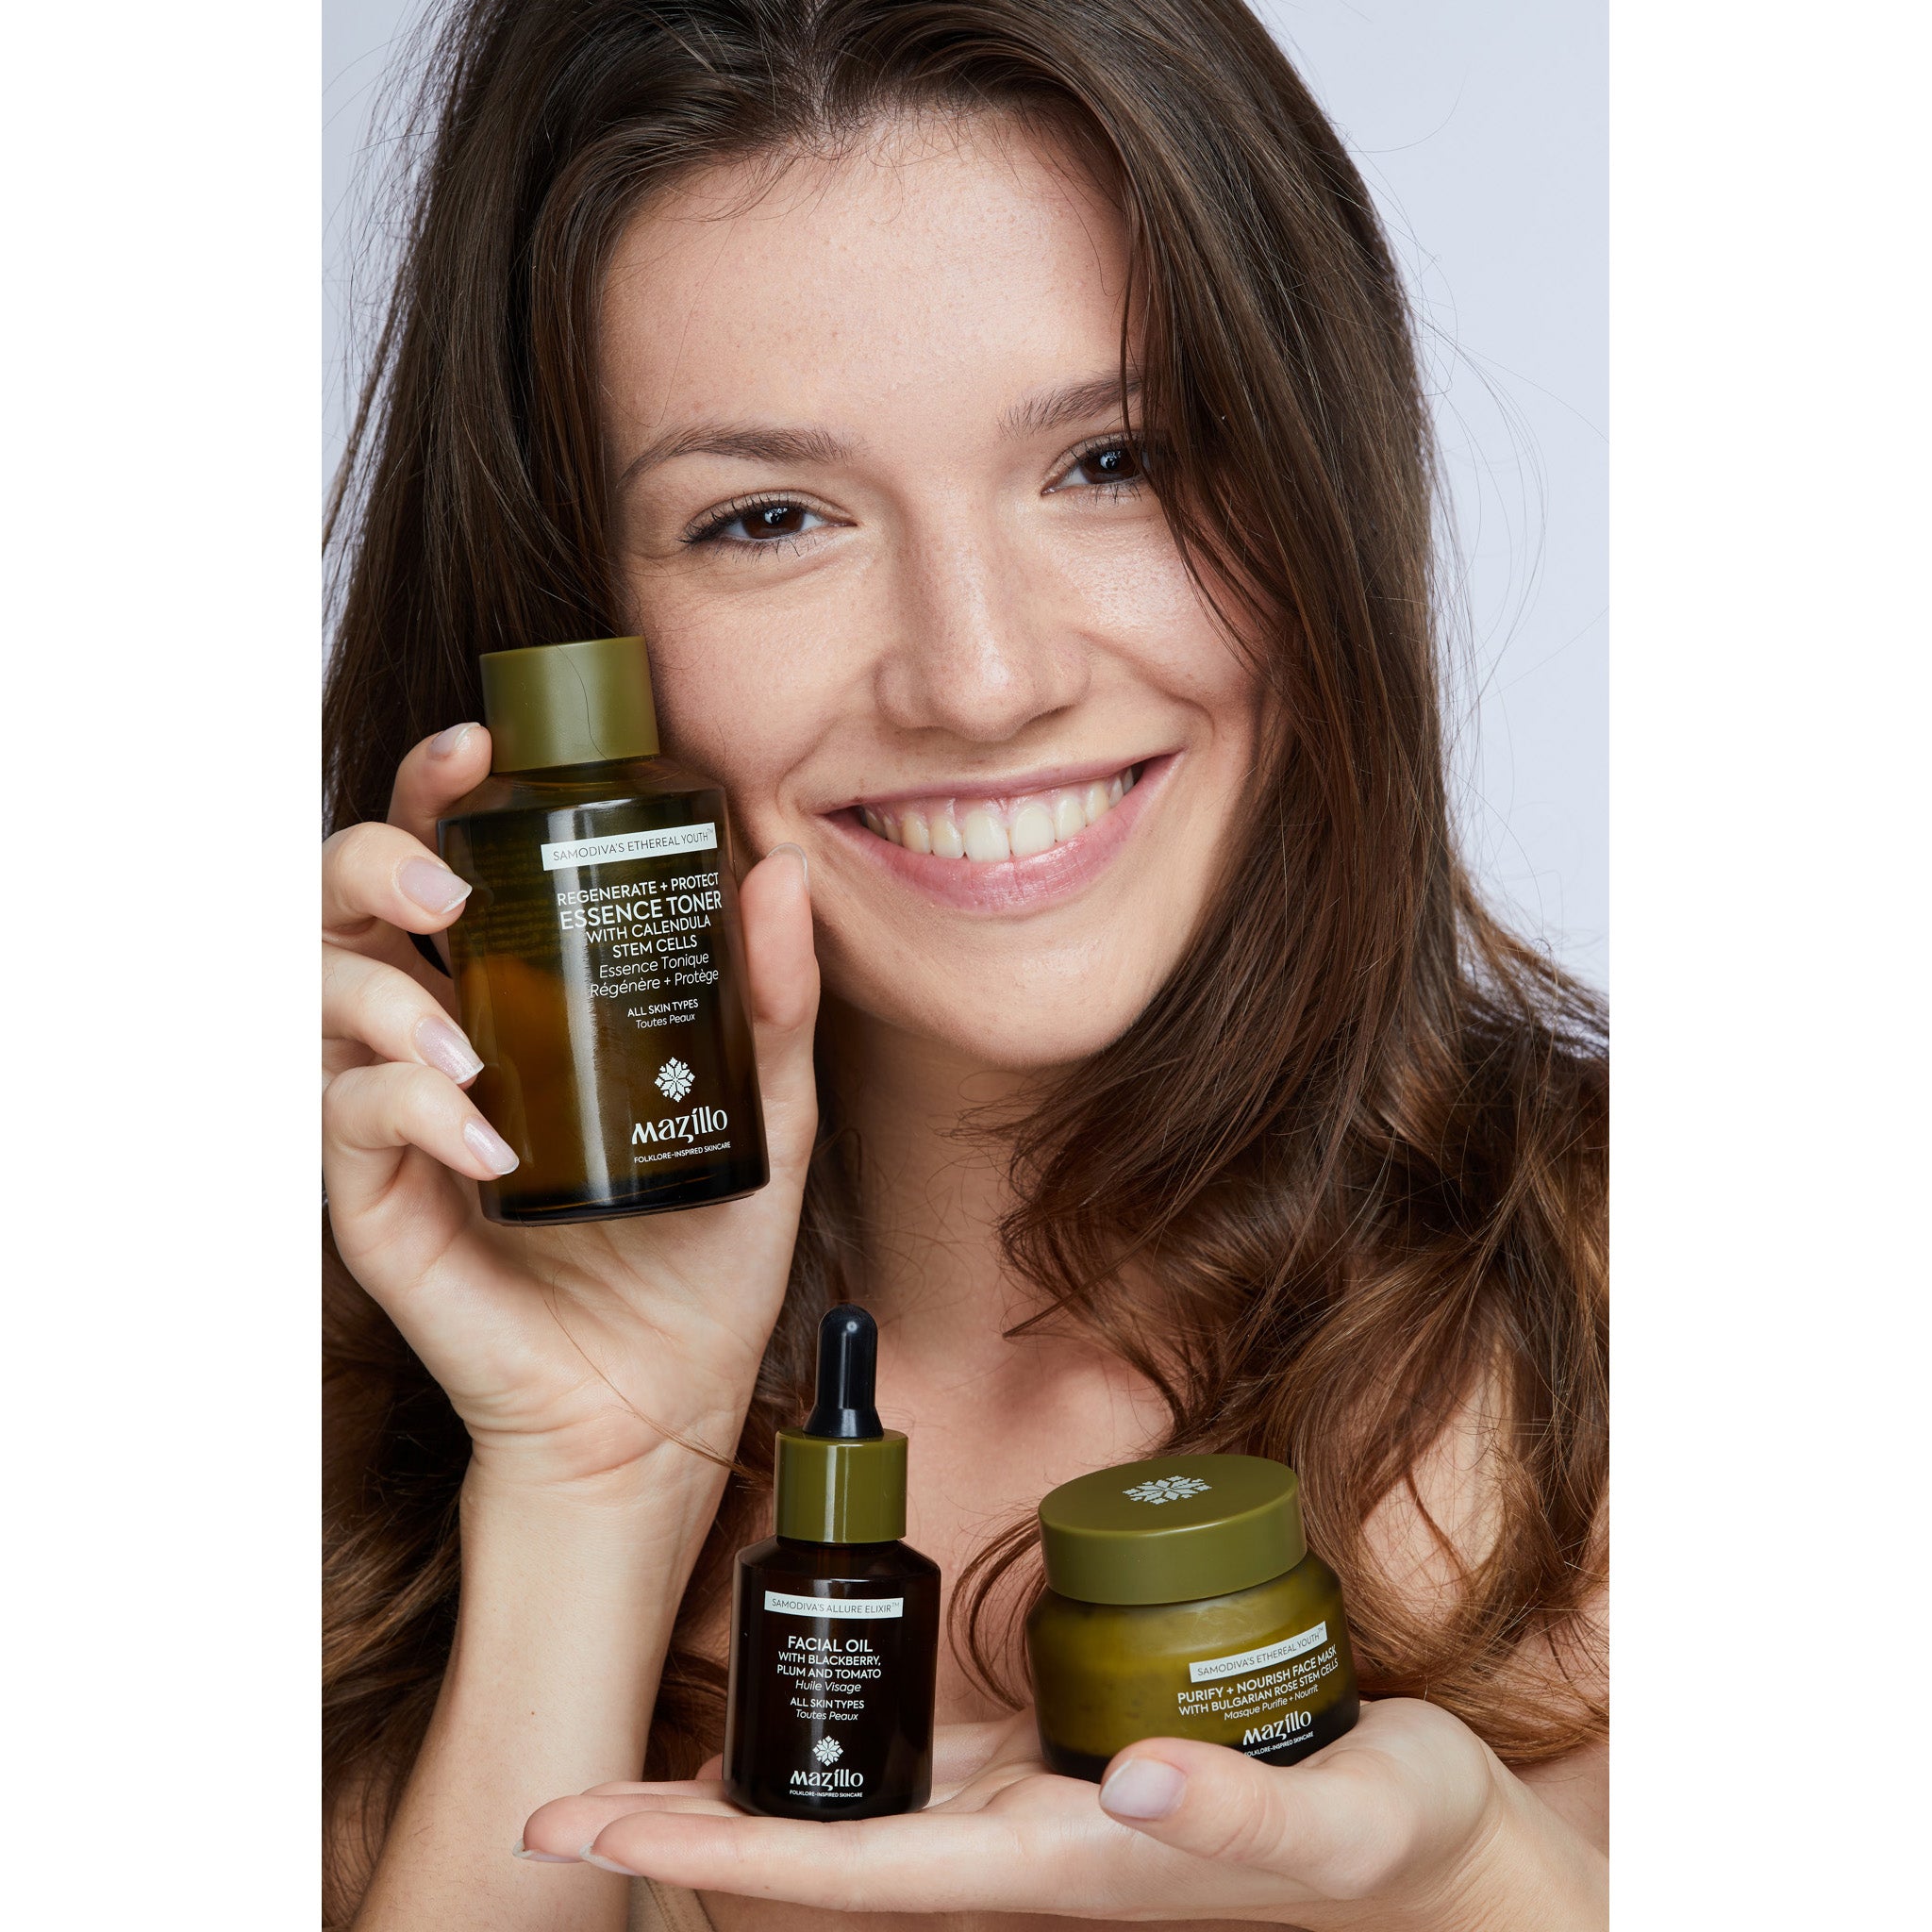 Pop up image of girl holding 3 Mazillo products